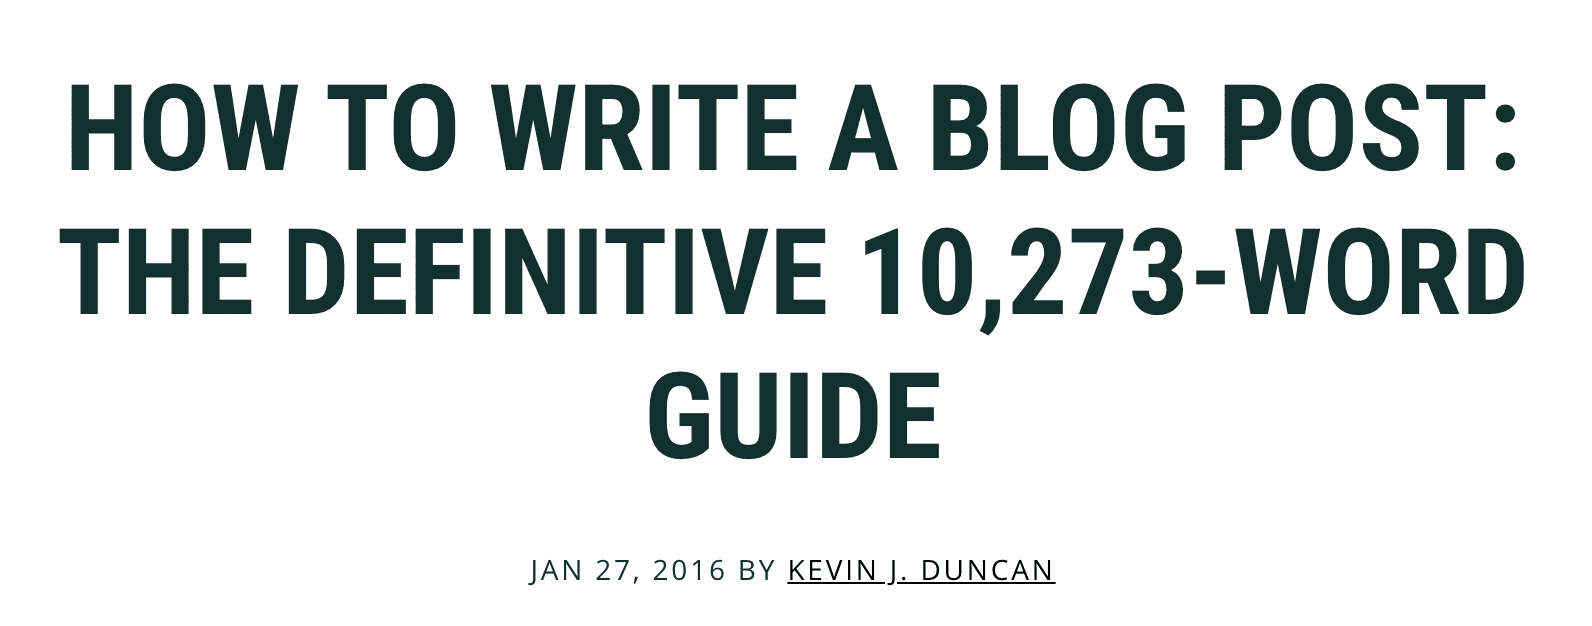 How To Write A Blog Post: The Definitive 10,273-Word Guide